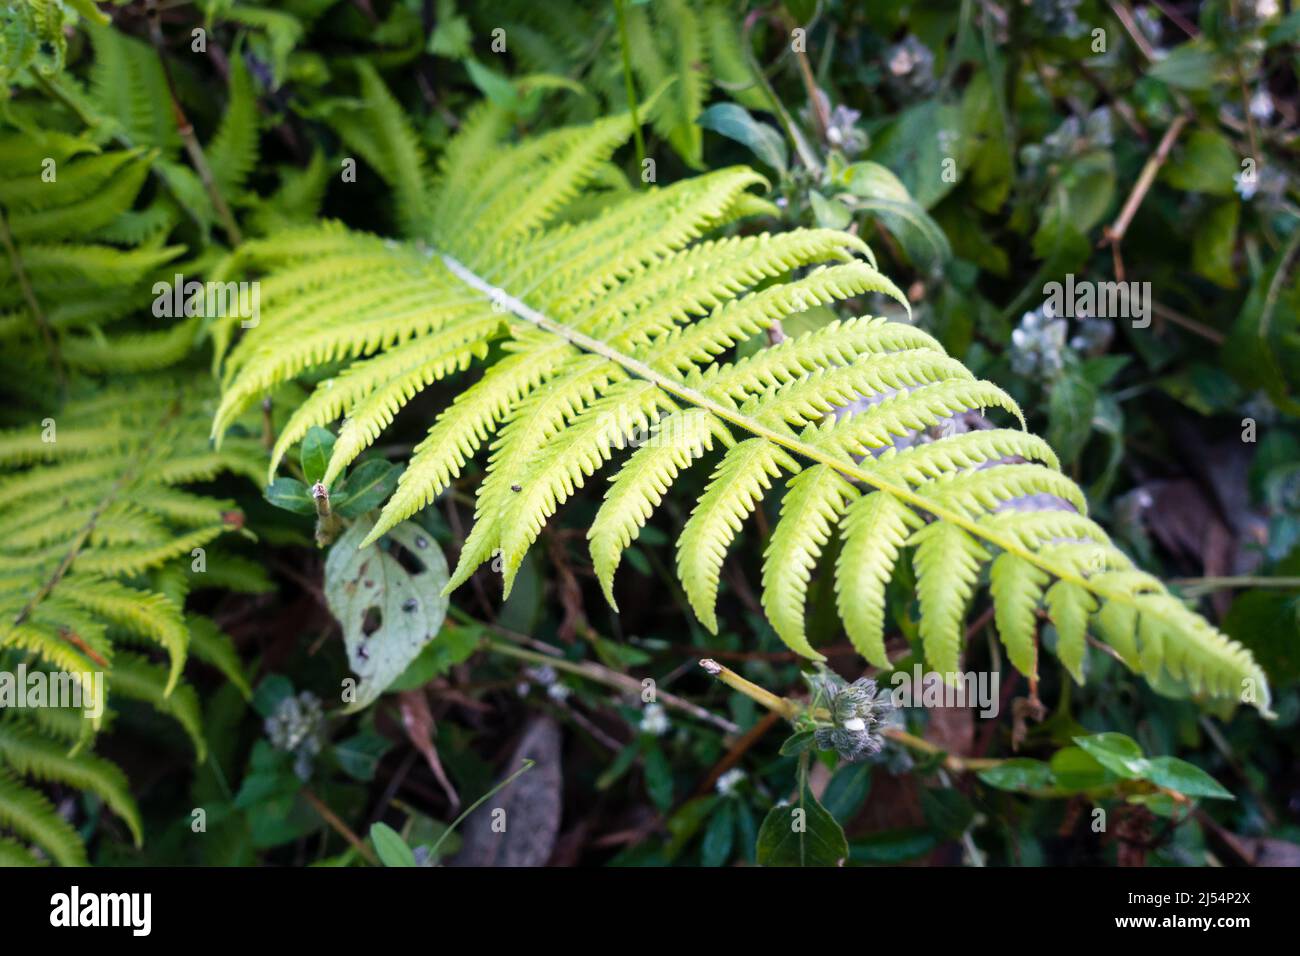 A close-up shot of Christella normalis, synonym Thelypteris kunthii, sometimes known as Kunth's maiden fern or southern shield fern Stock Photo